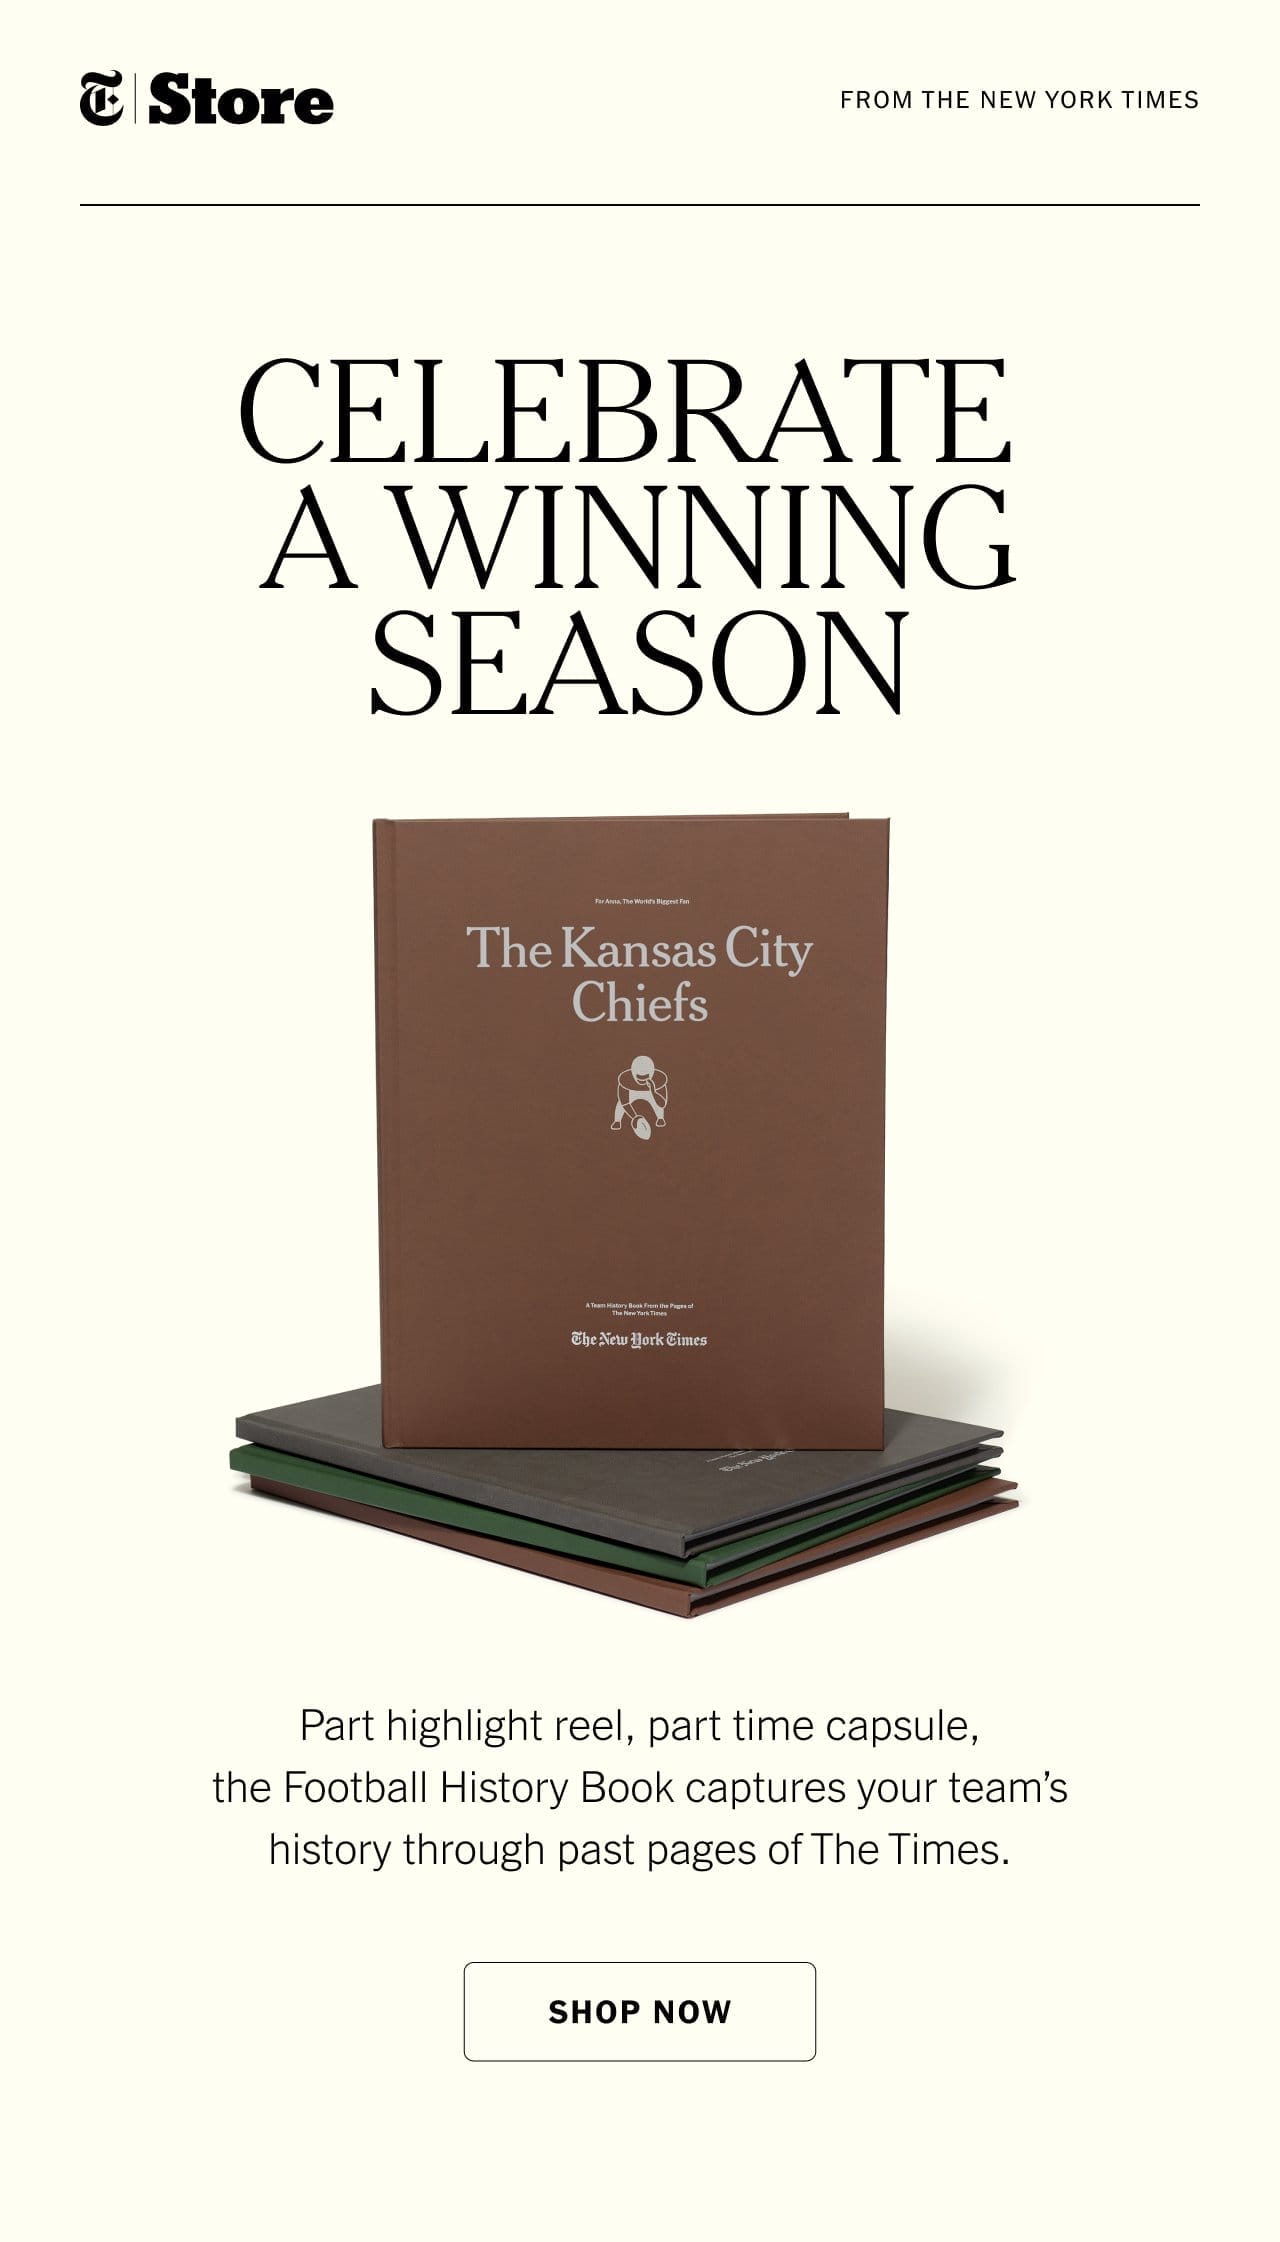 Celebrate A Winning Season. Part highlight reel, part time capsule, the Football History Book captures your team’s history through past pages of The Times.